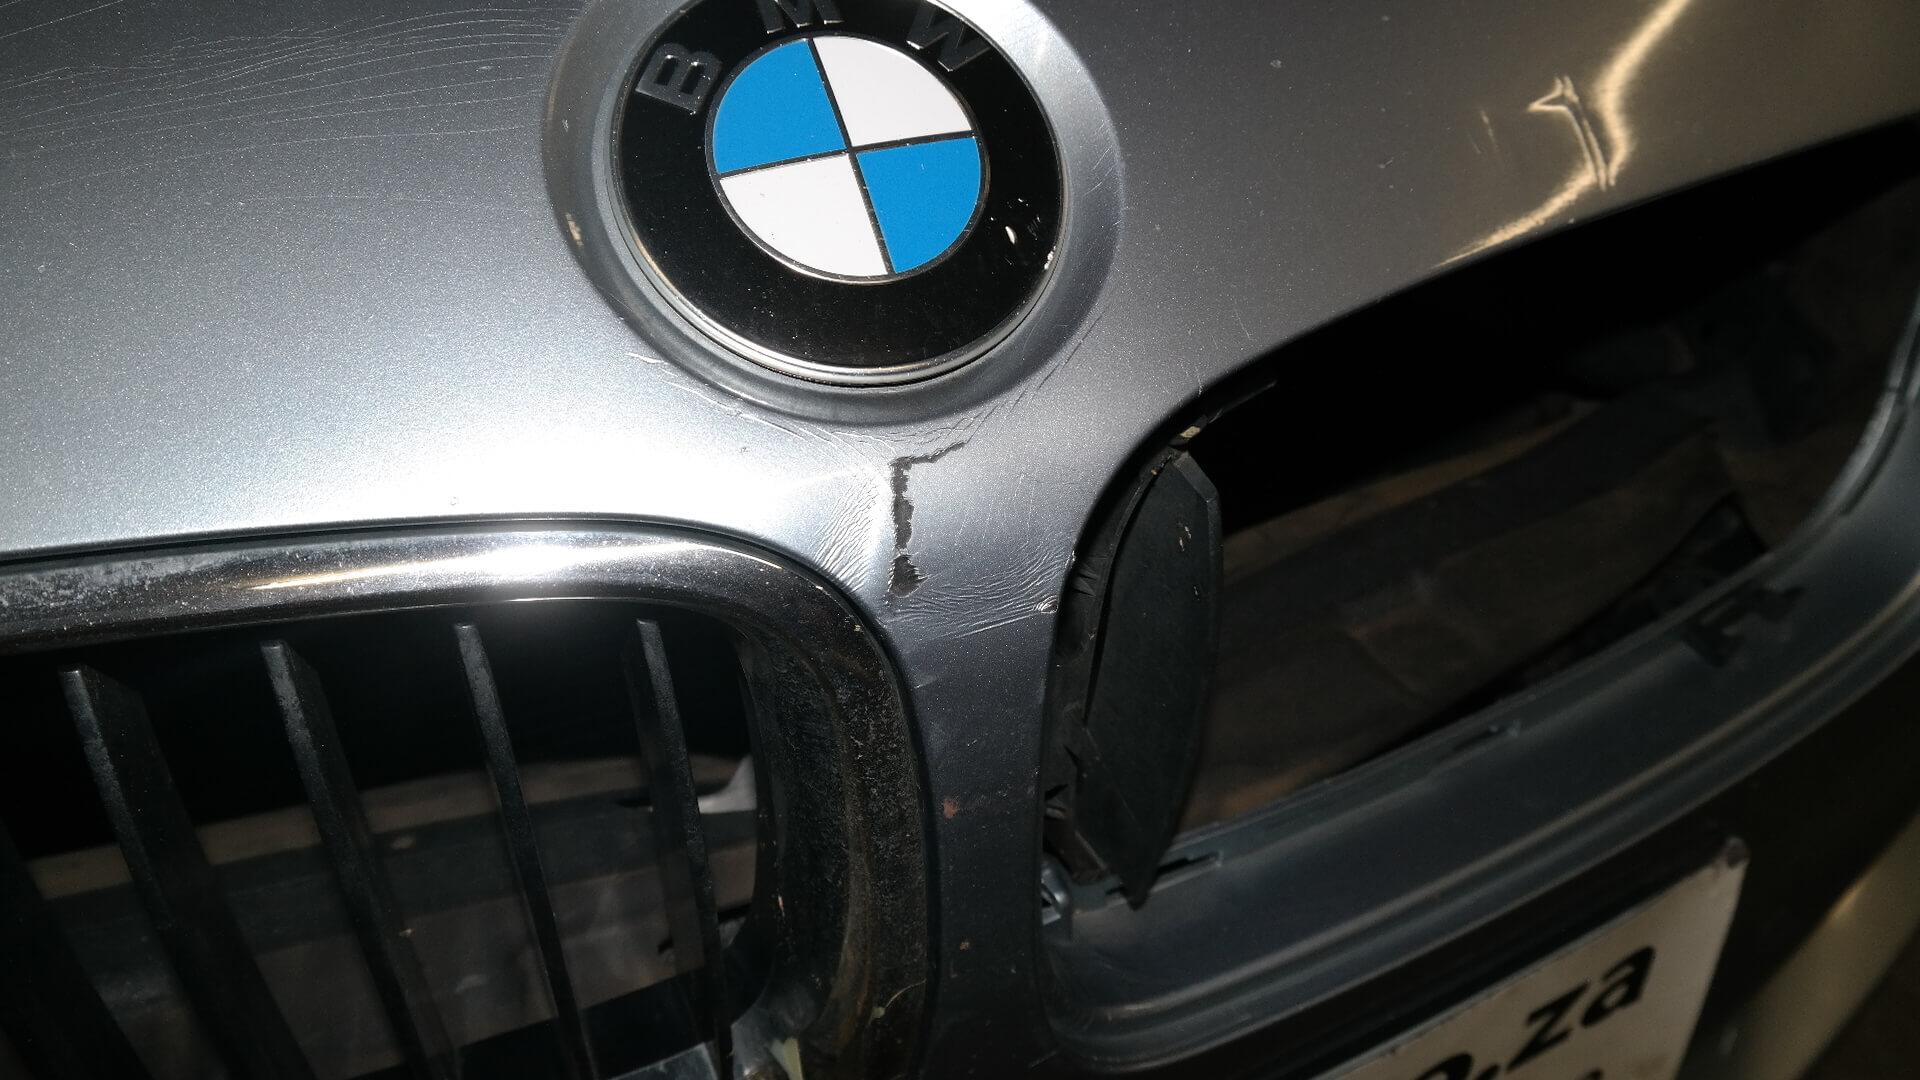 How to open a stuck hood on a BMW F30 2013